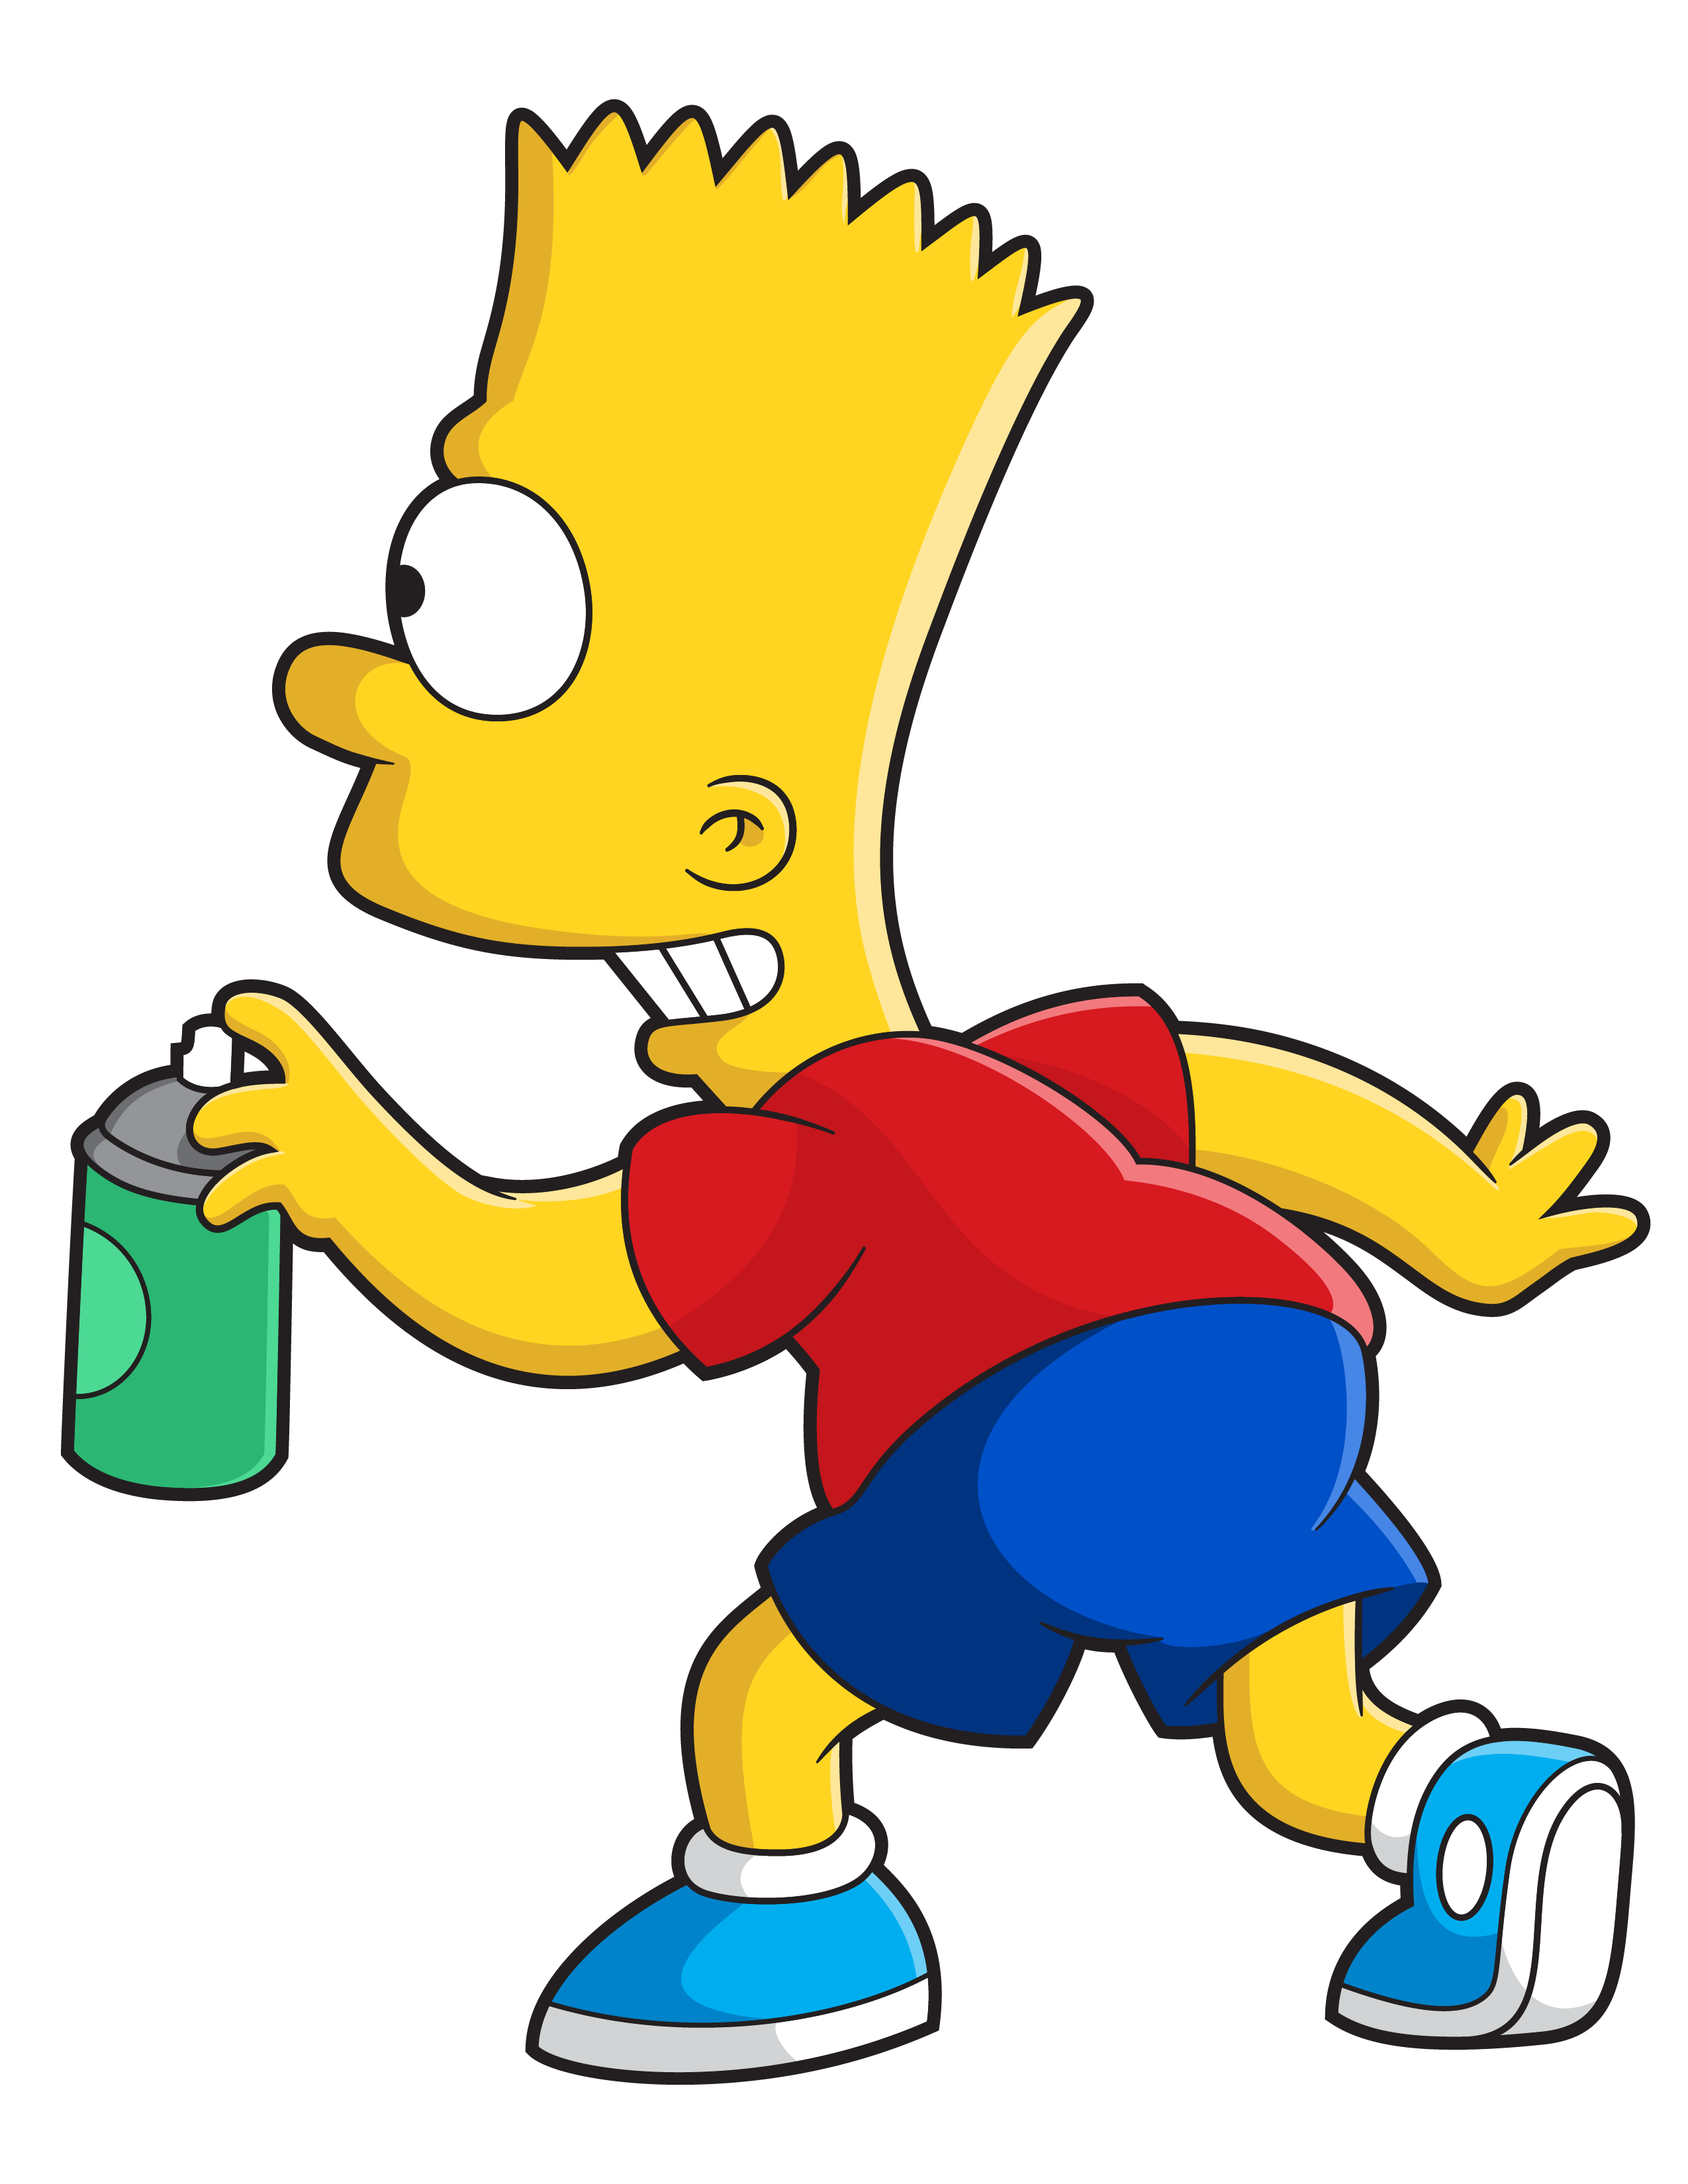 Simpsons The Cartoon Download HD PNG Image